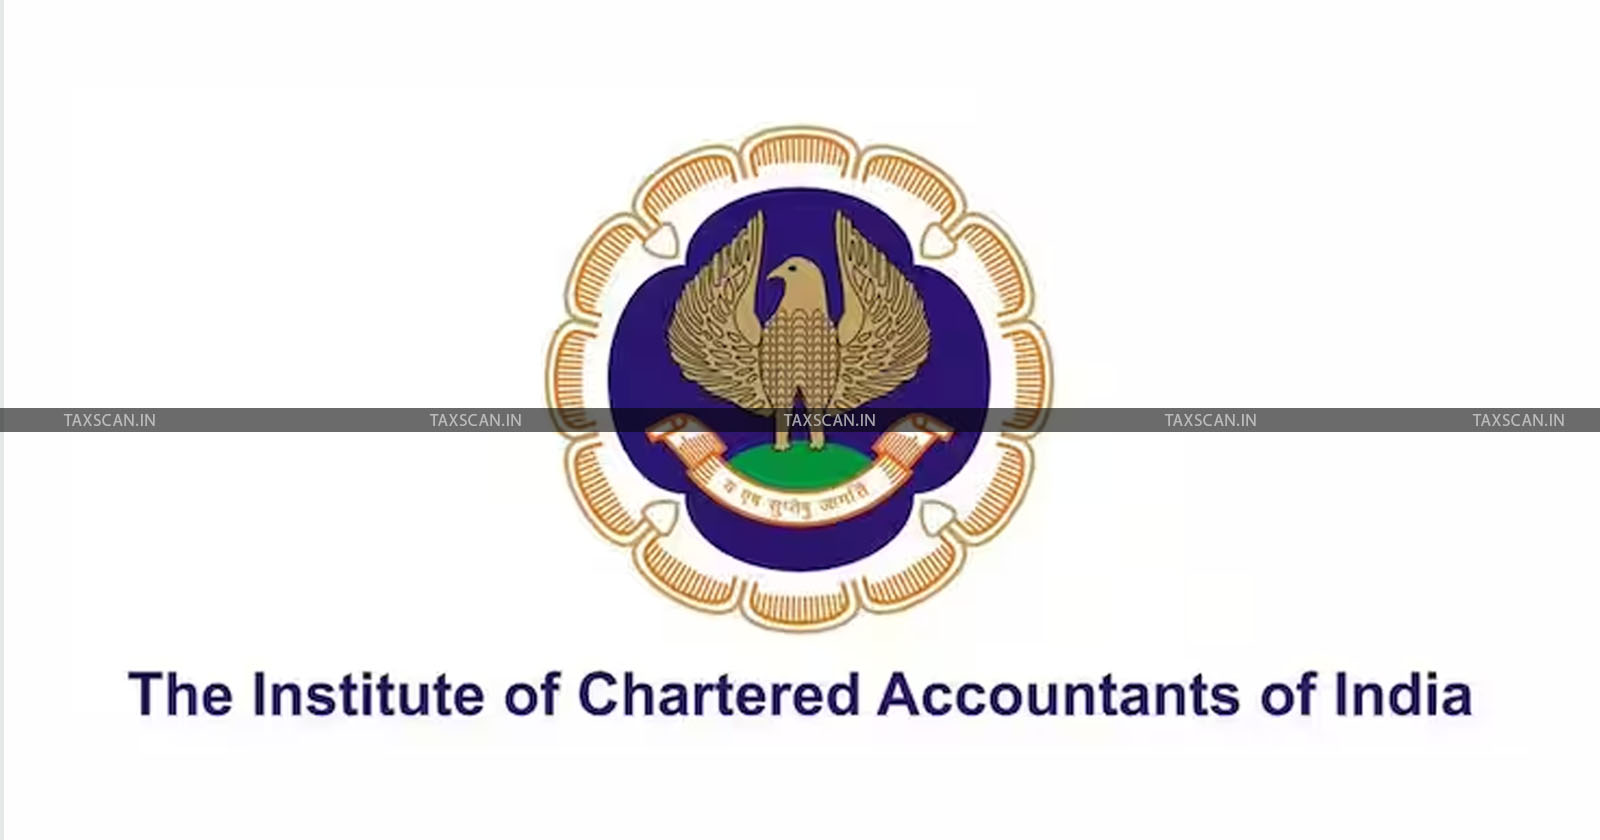 Institute of chartered accountants - Chartered accountant institutions in india - Chartered accountants in India - ICAI - taxscan